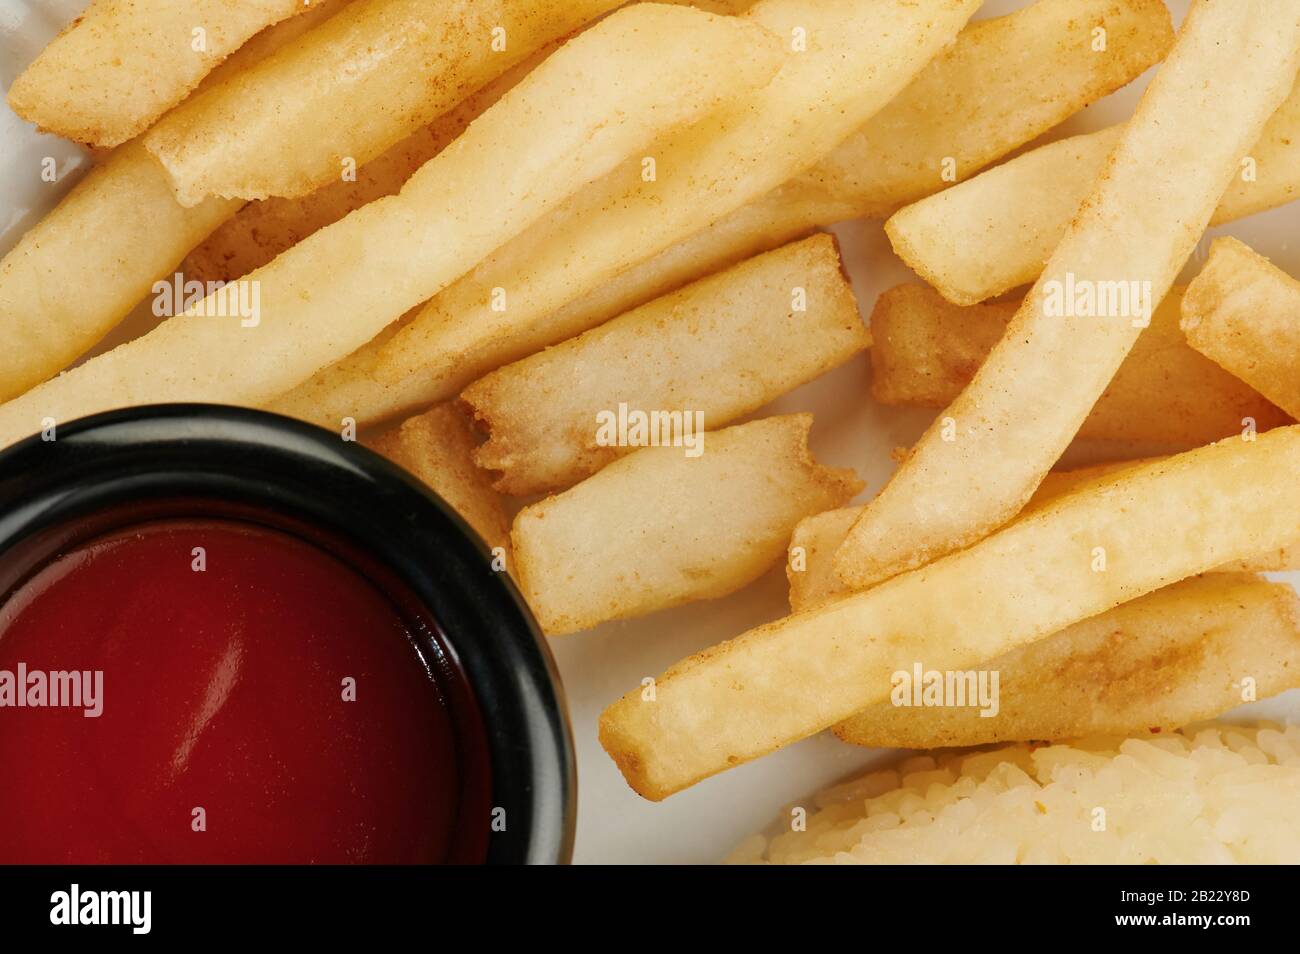 Fresh french fries with tomato ketchup macro close up view Stock Photo